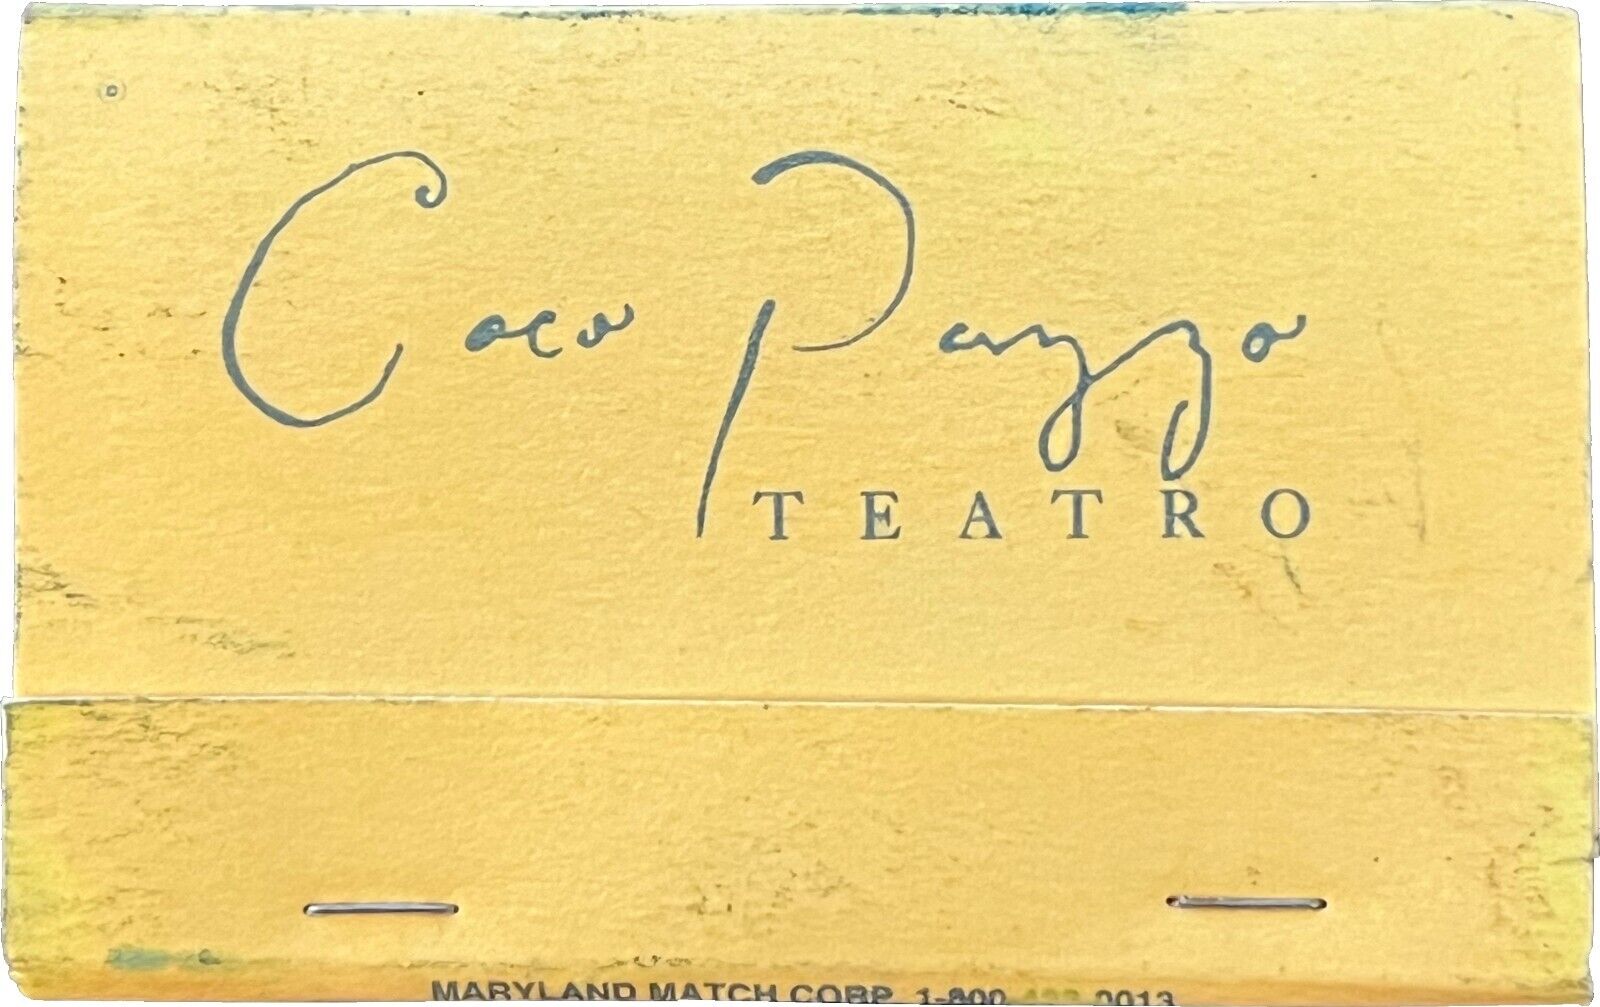 Coco Pazzo Teatro, 46th St., NY, cocopazzo Match Book Matches Matchbook